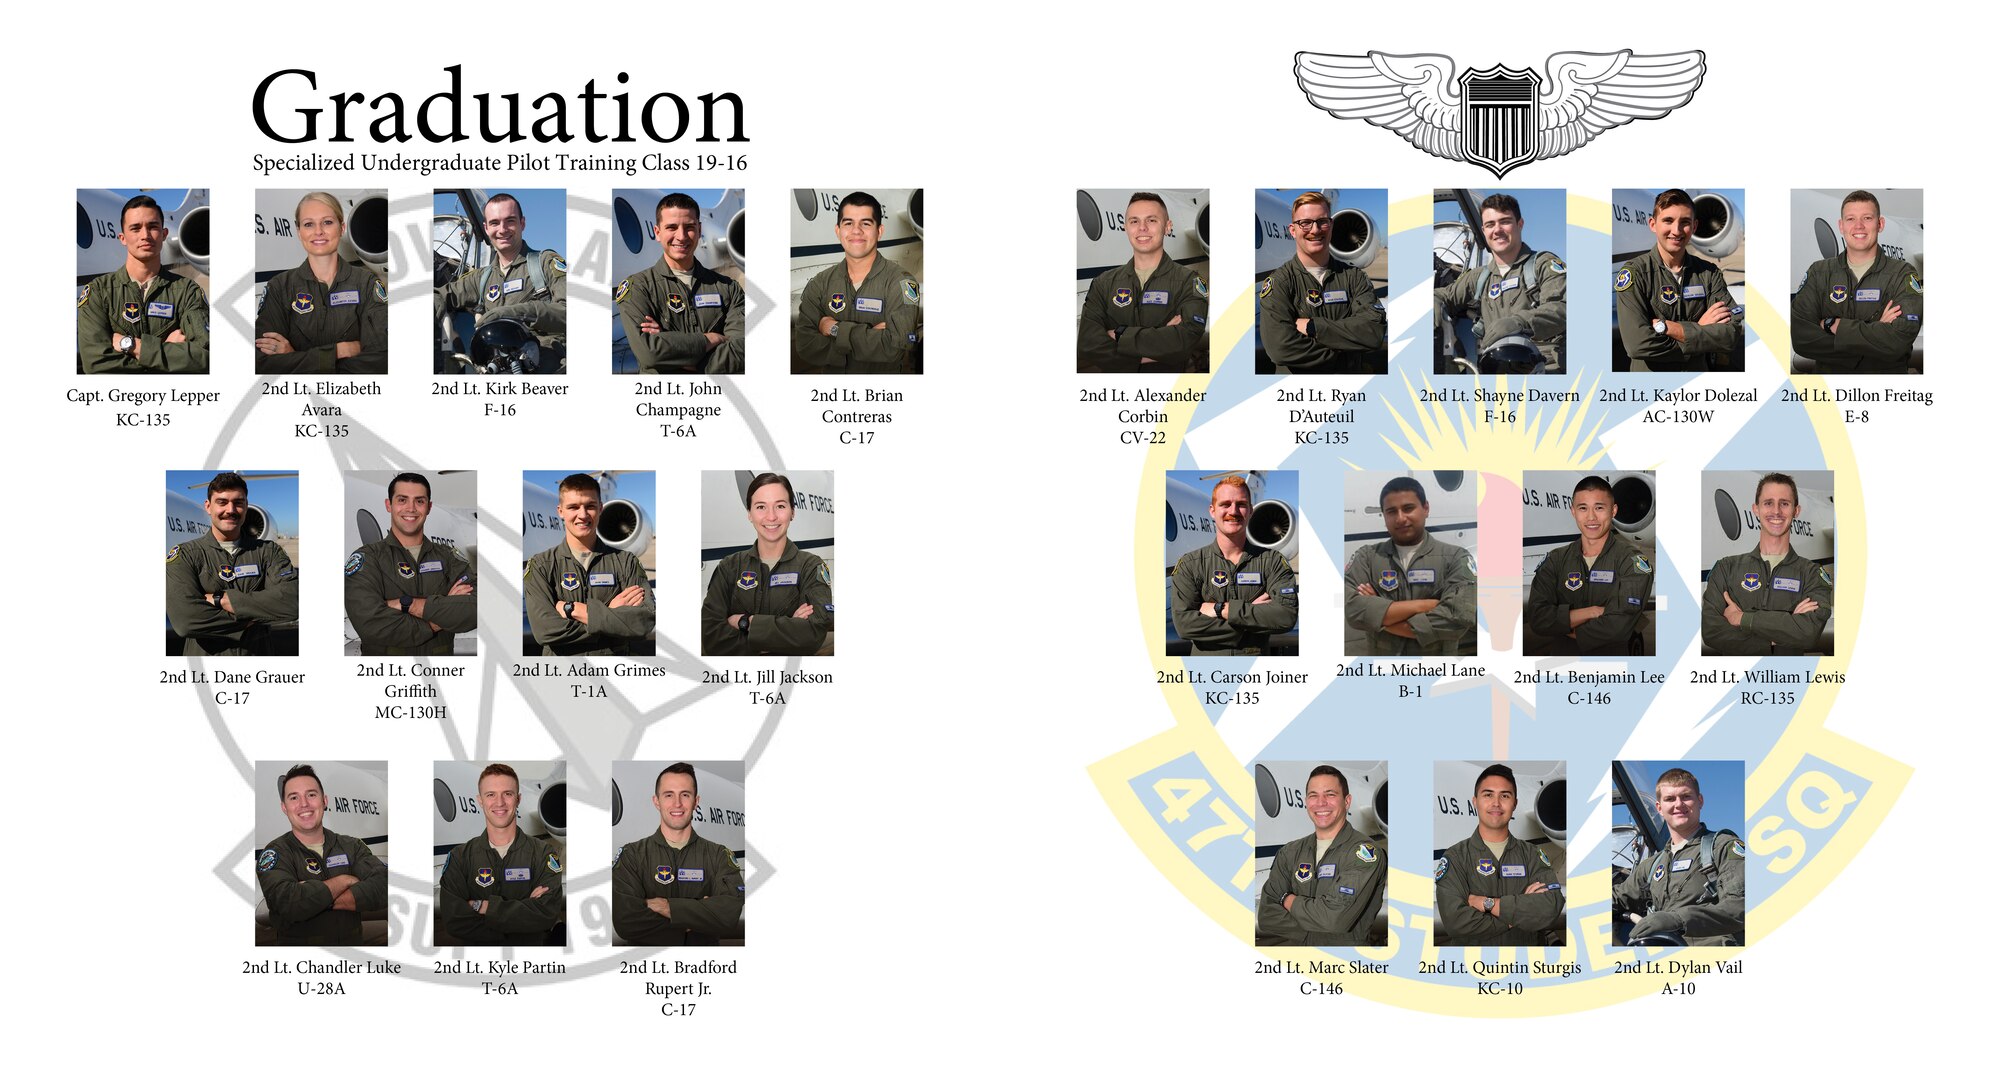 Specialized Undergraduate Pilot Training Class 19-16 is set to graduate after 52 weeks of training at Laughlin Air Force Base, Texas, May 31, 2019. Laughlin is the home of the 47th Flying Training Wing, whose mission is to train the next generation of multi-domain combat aviators, deploy mission-ready warriors and develop professional, confident leaders. (U.S. Air Force graphic Airman 1st Class Marco A. Gomez)